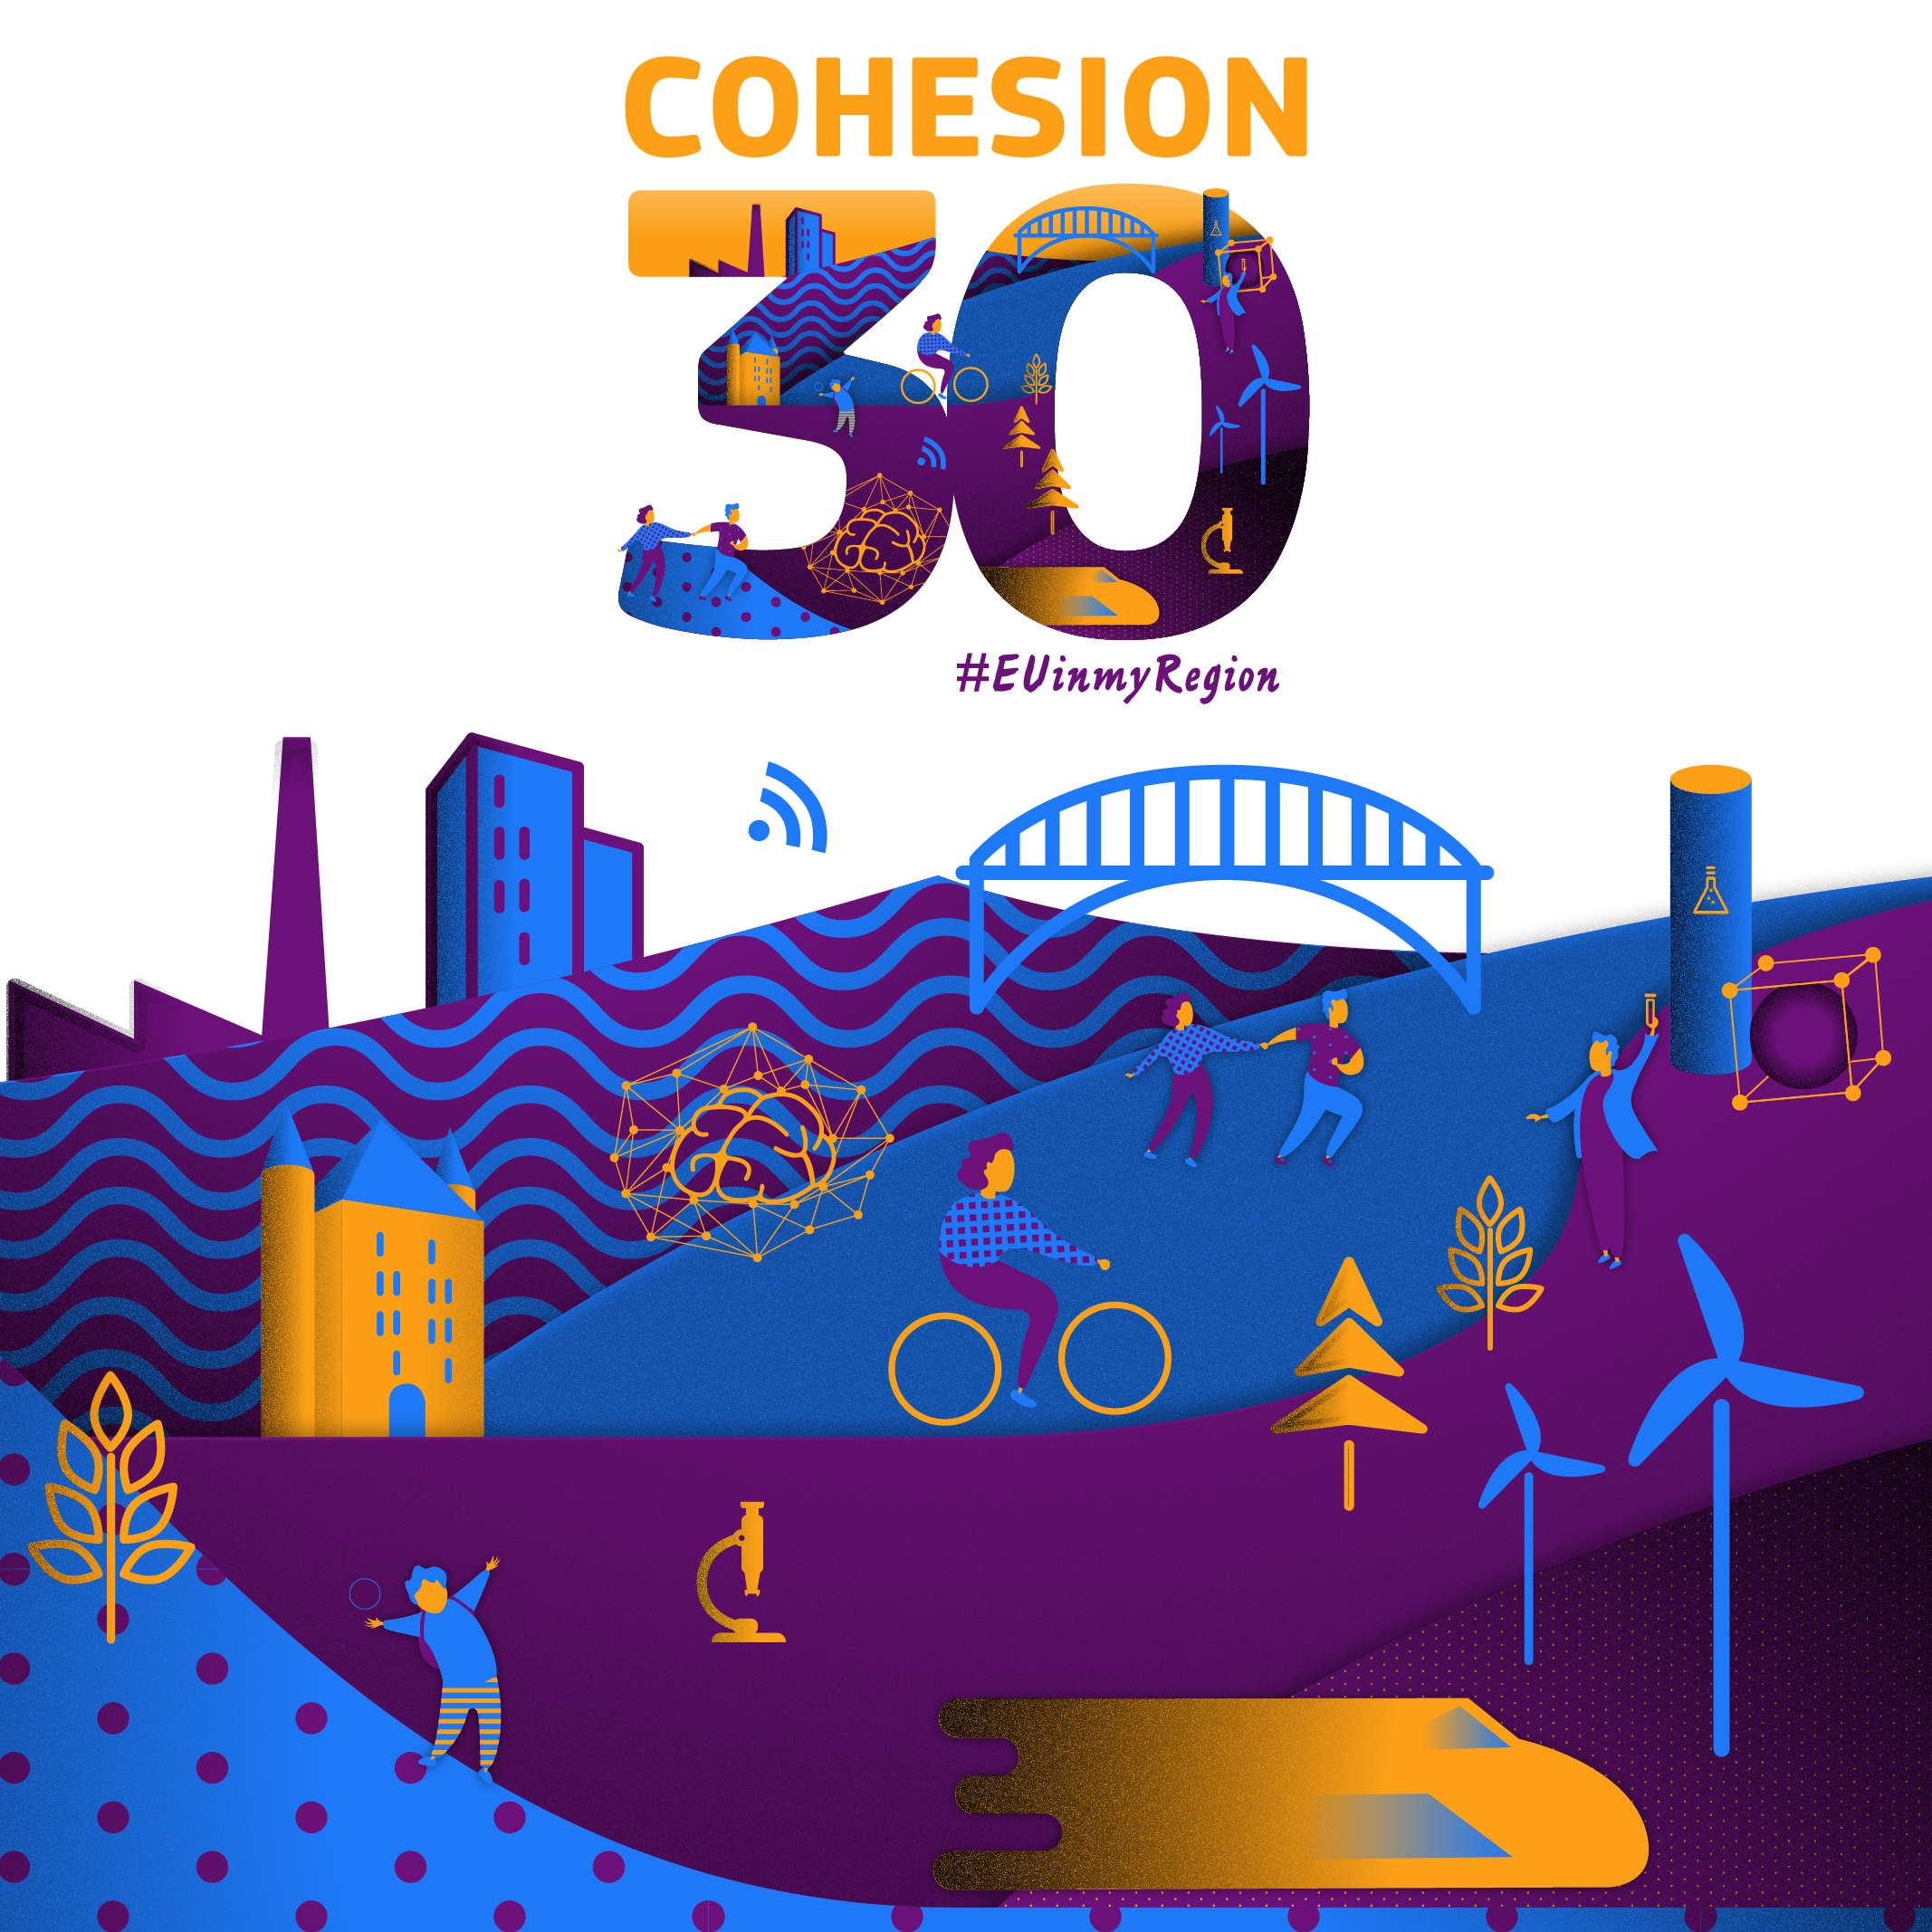 Public consultation on EU funds in the area of cohesion